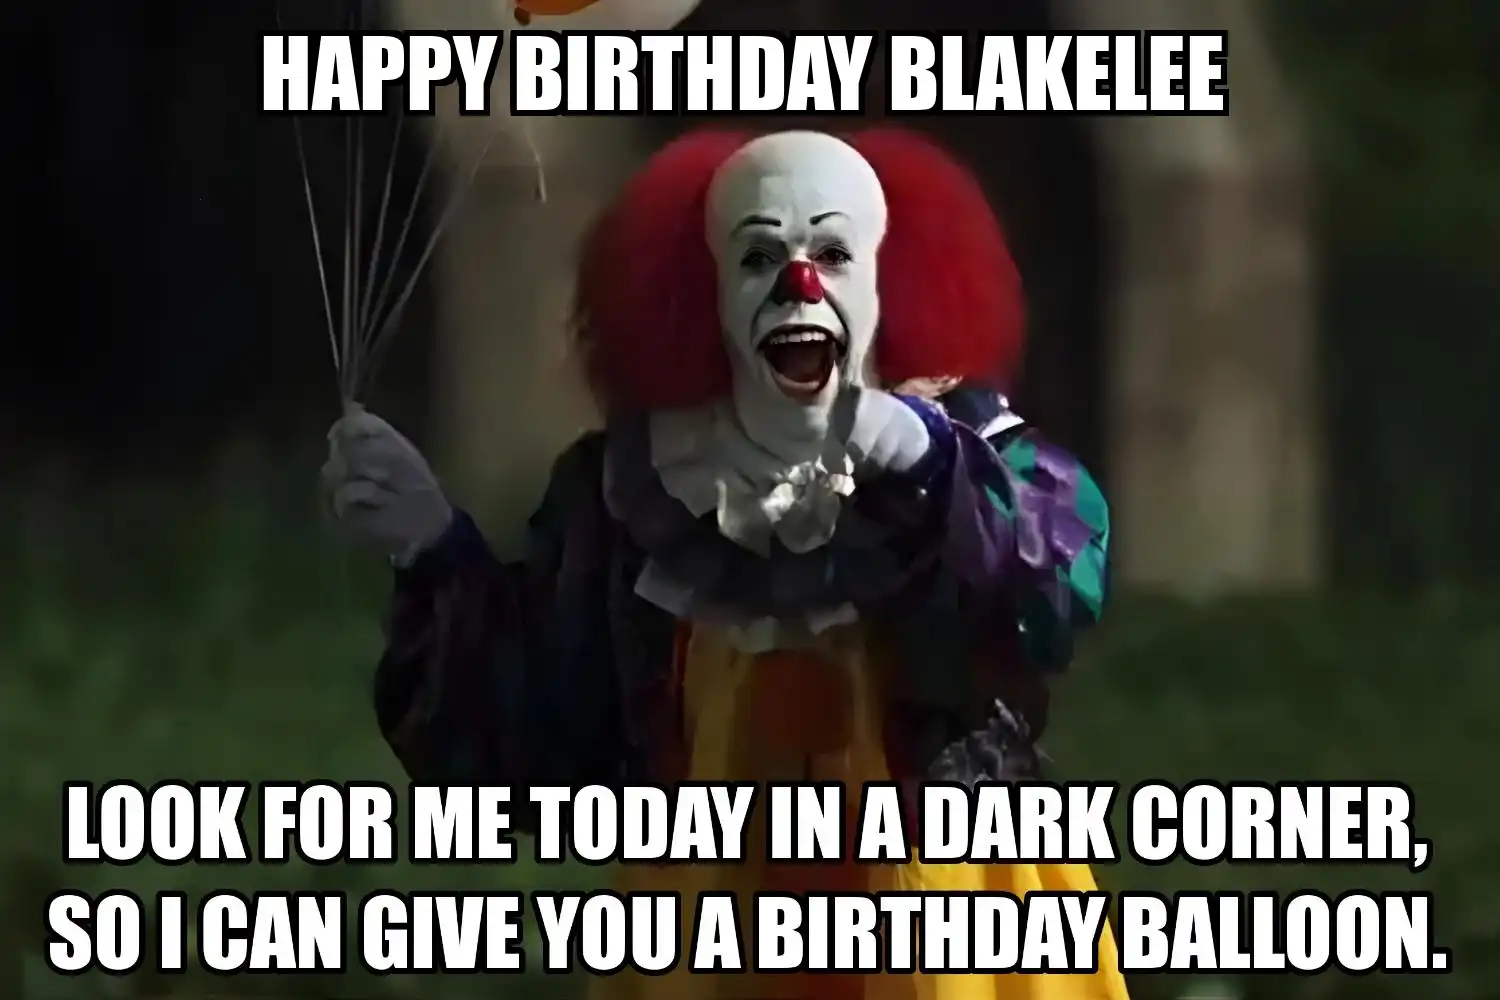 Happy Birthday Blakelee I Can Give You A Balloon Meme